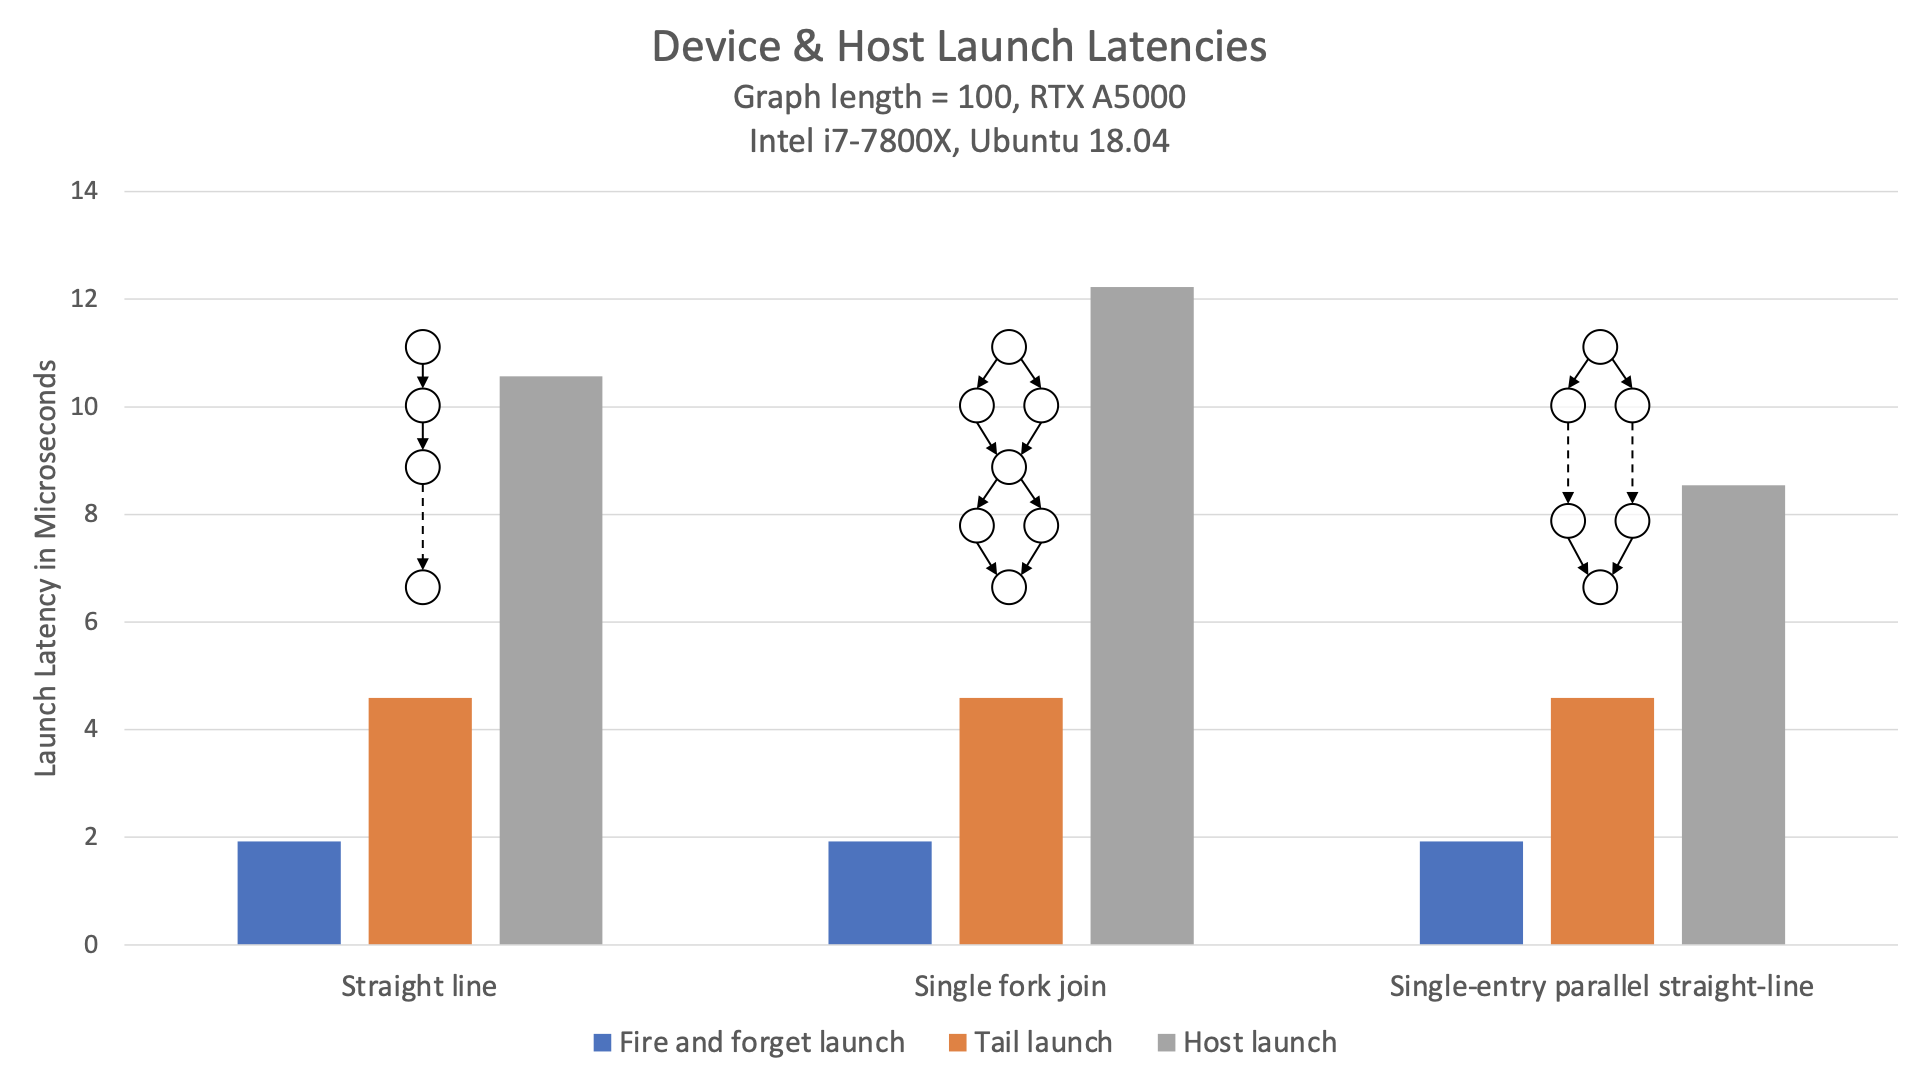 A chart comparing the two device launch modes and host launch for three topologies. The topologies are a straight-line graph, a graph which forks and joins repeatedly, and a graph which forks once into parallel straight-line sections.